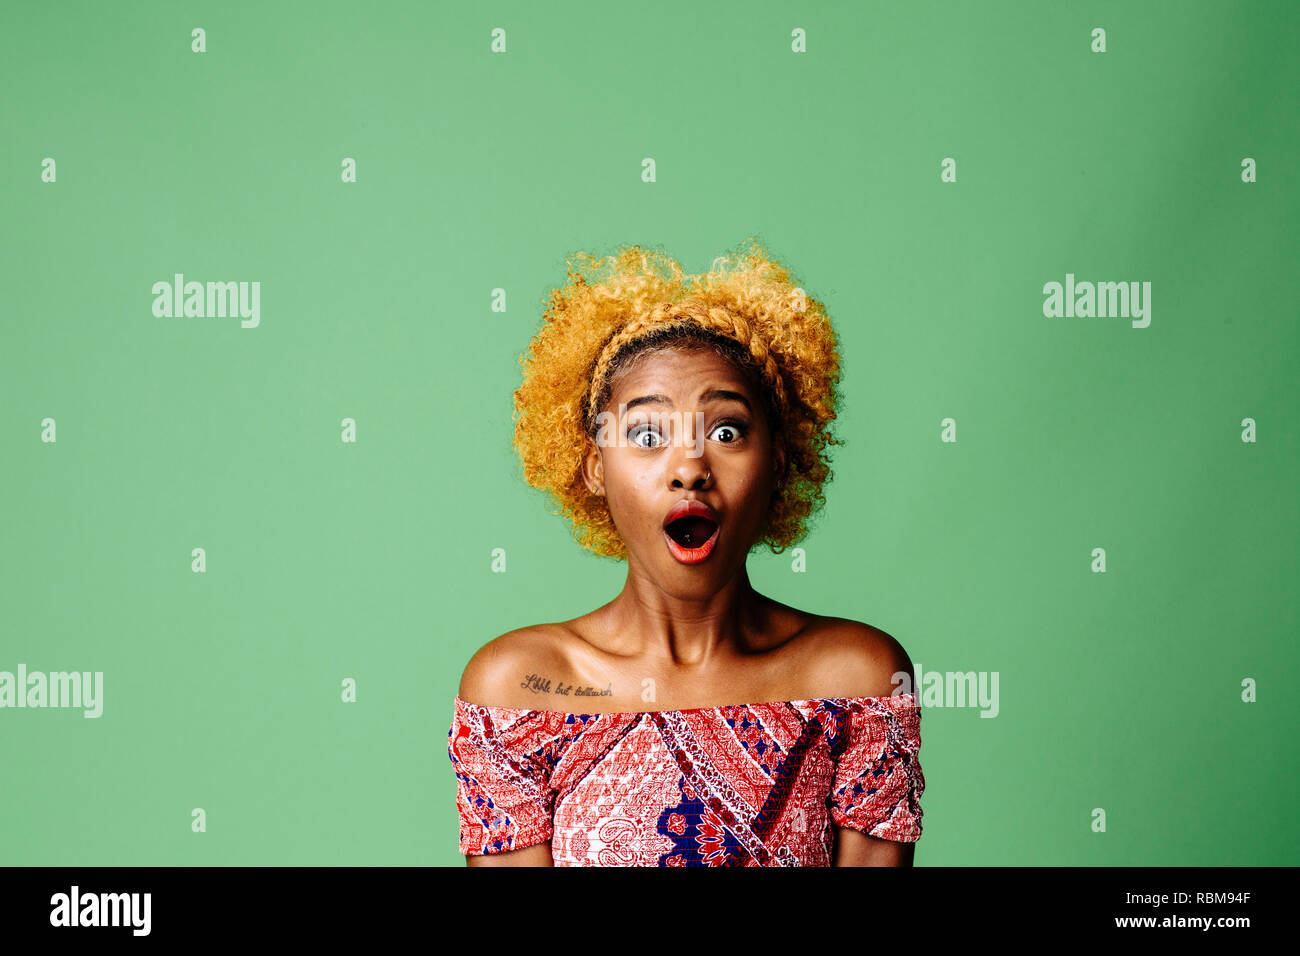 Young woman with a shocked expression looking at something, isolated on green studio background Stock Photo